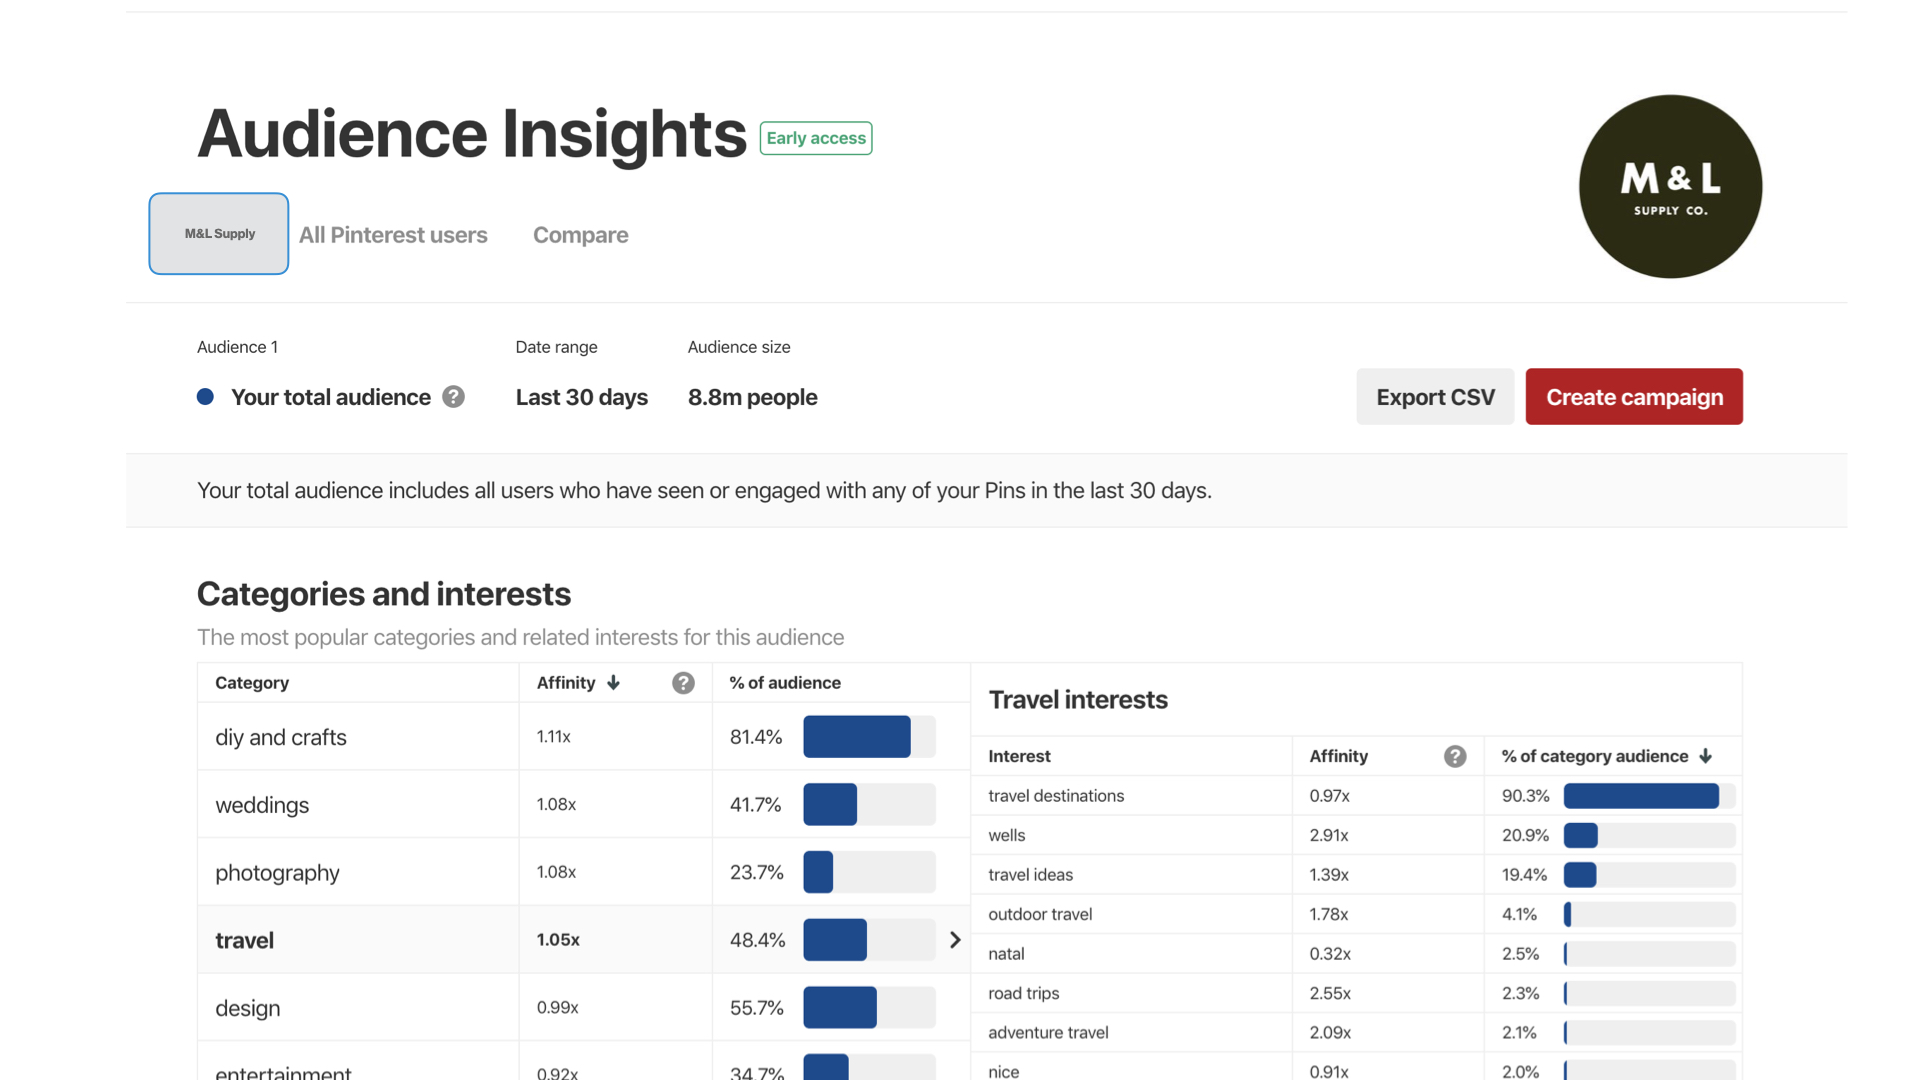 Audience Insights